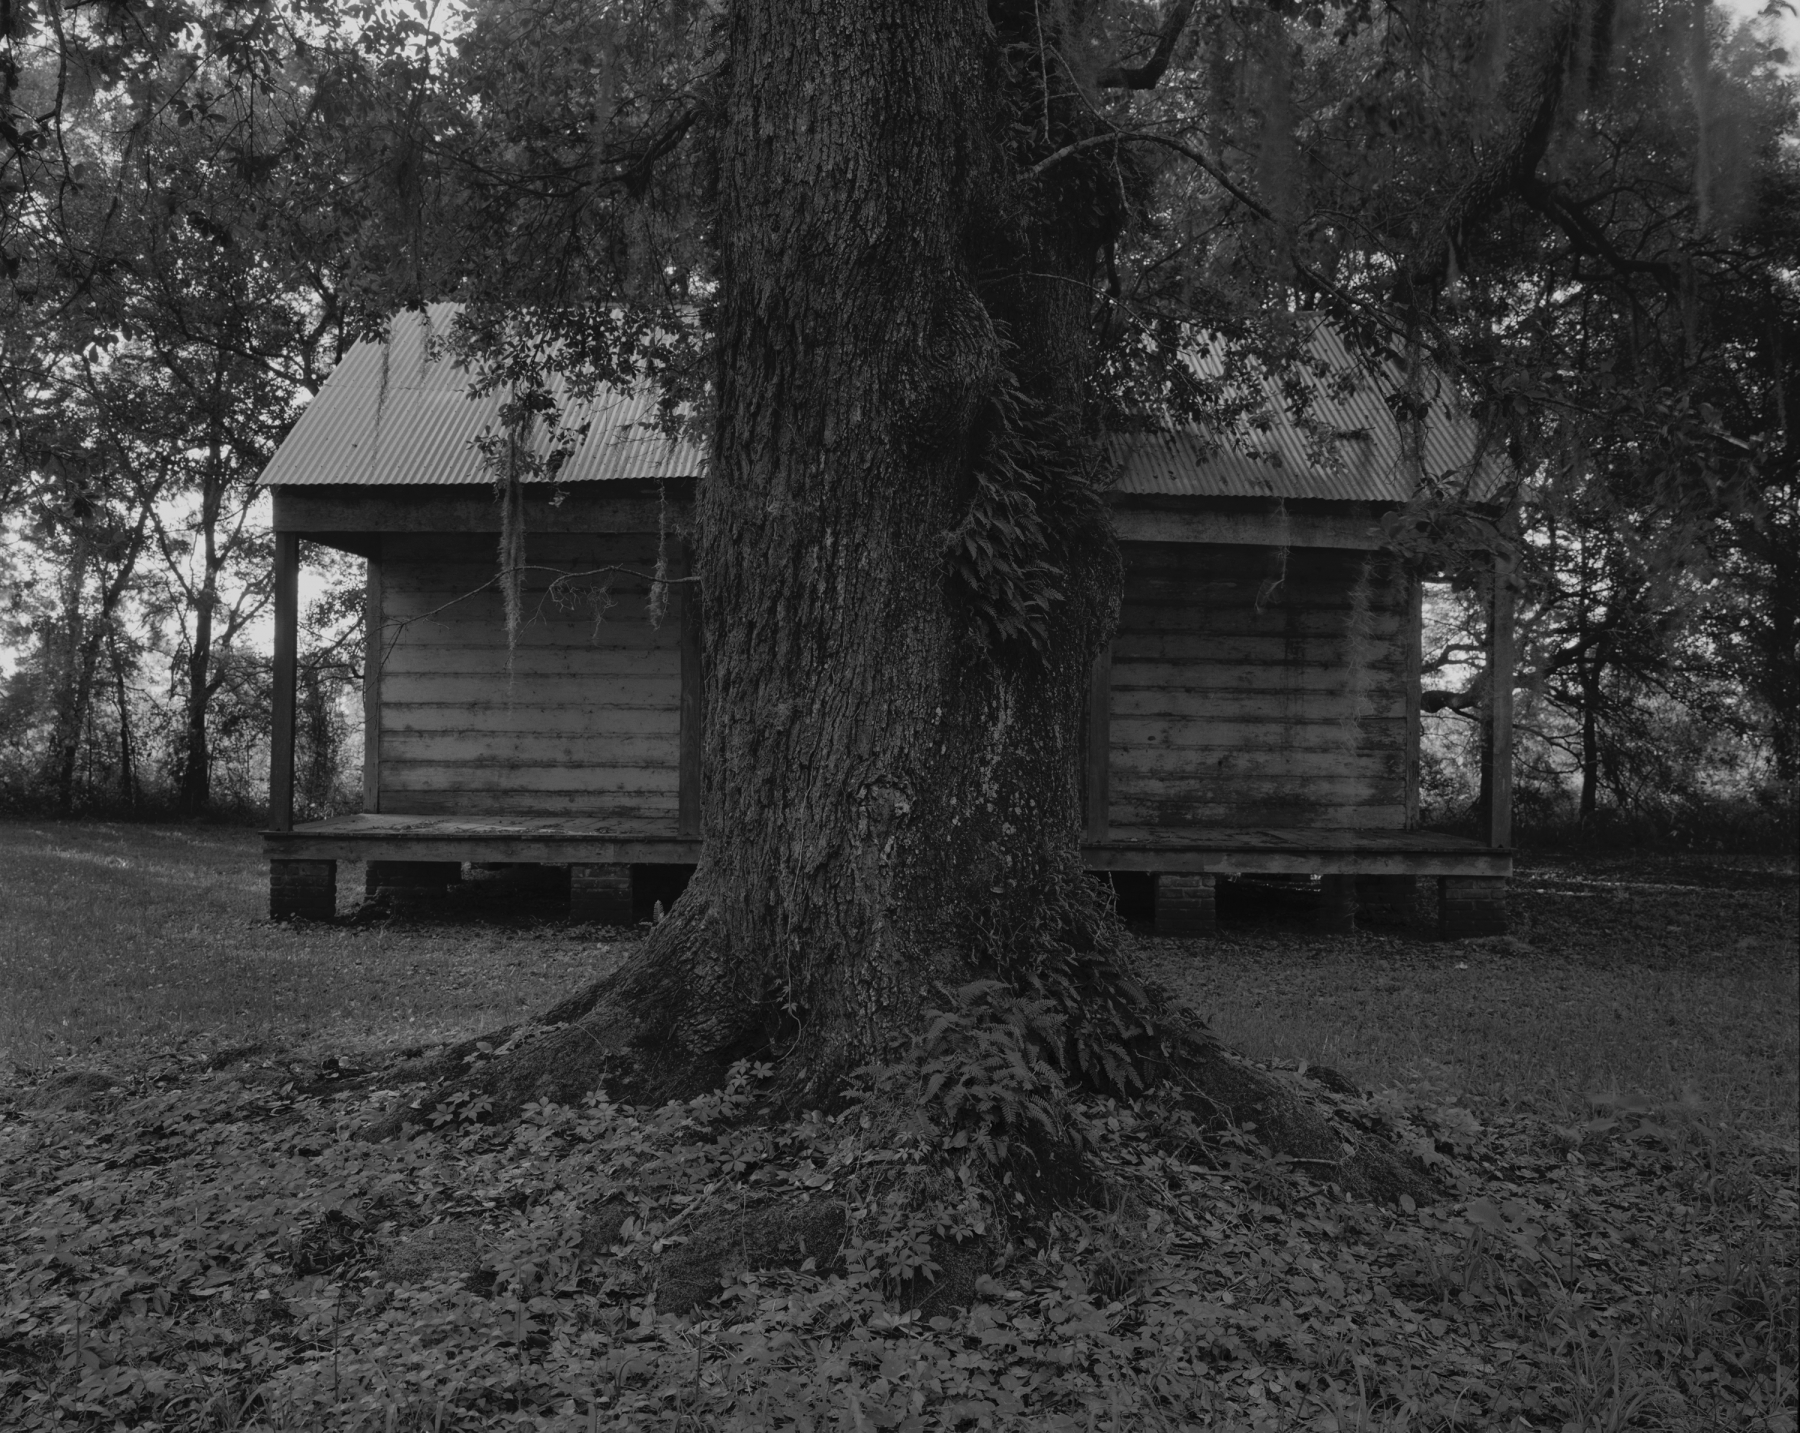 Tree and Cabin, 2019
gelatin silver print
framed: 49 x 60 x 2 inches (124.5 x 152.4 x 5.1 cm)
edition of 6 with 2 APs&nbsp;
(DB-ITHP.19.01.2)
&nbsp;